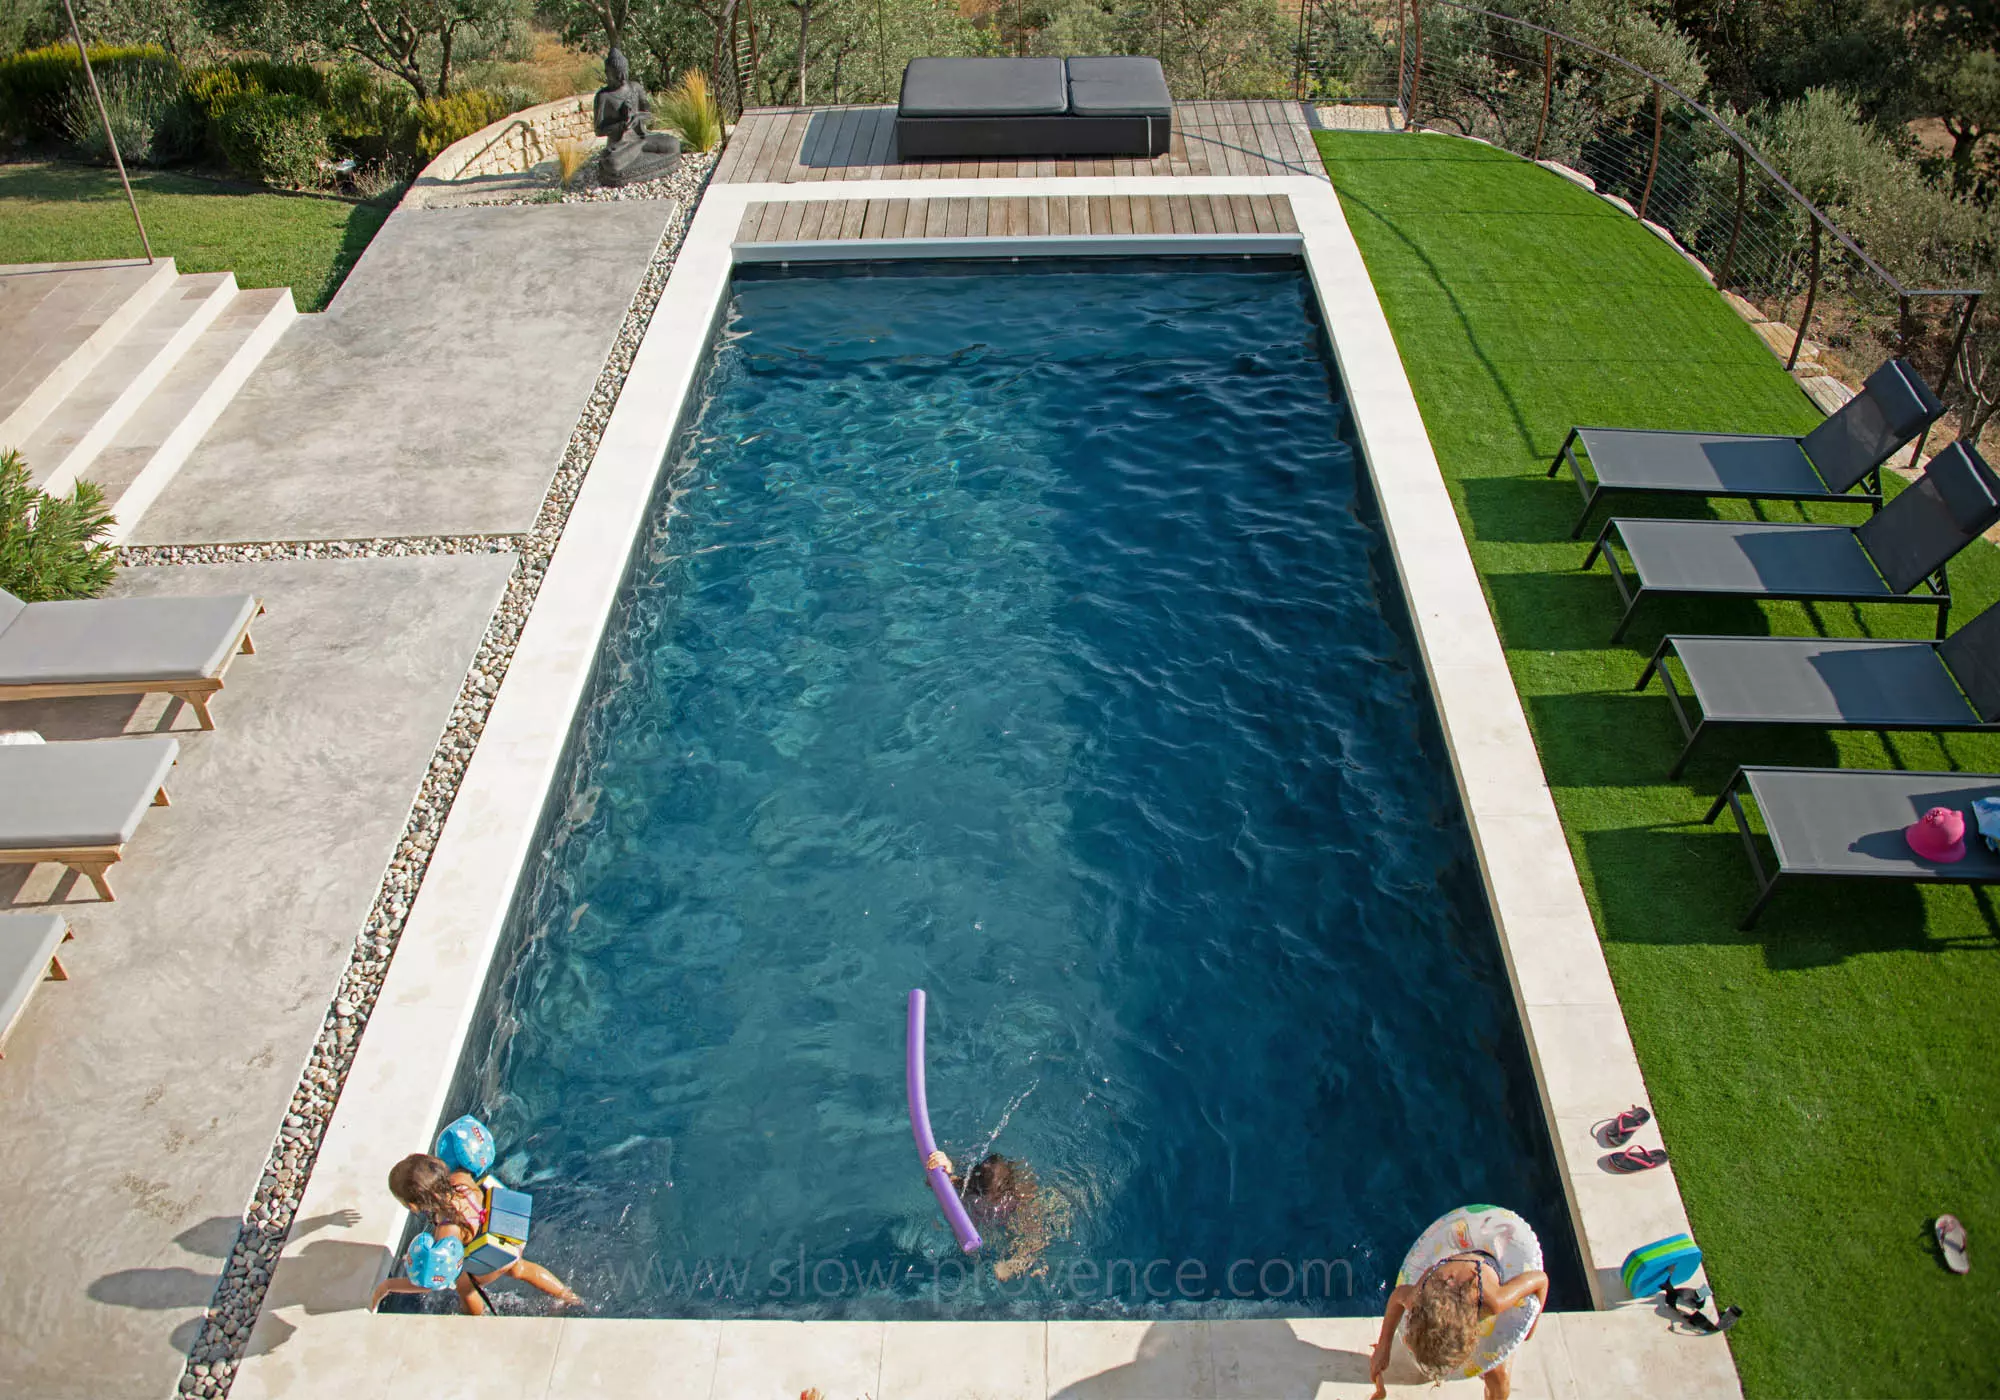 A large swimming pool to delight children